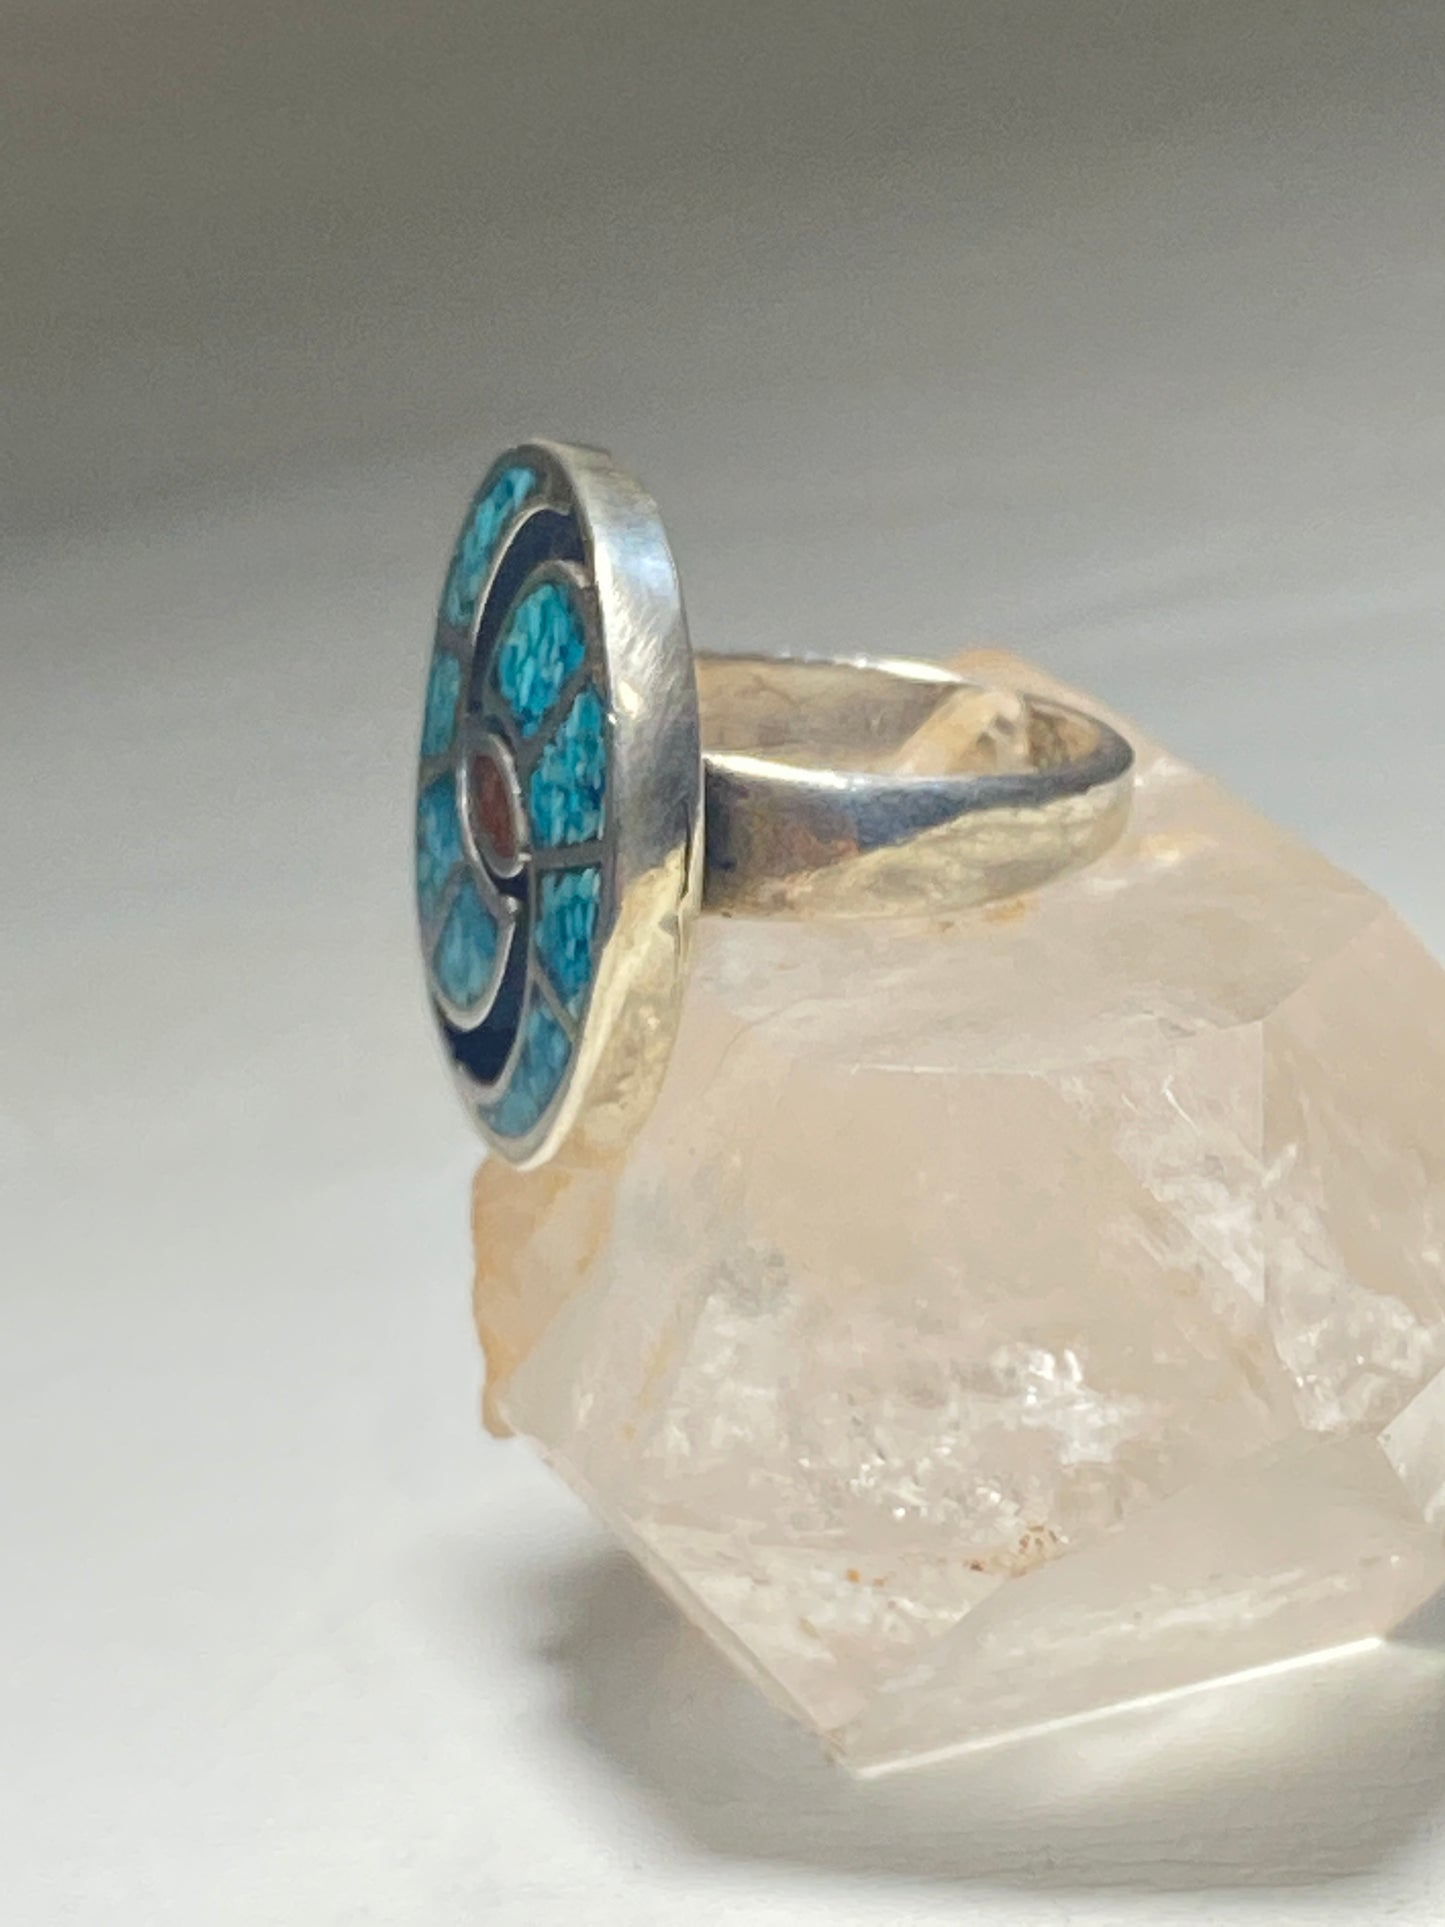 Turquoise chip ring coral hummingbird design southwest sterling silver women